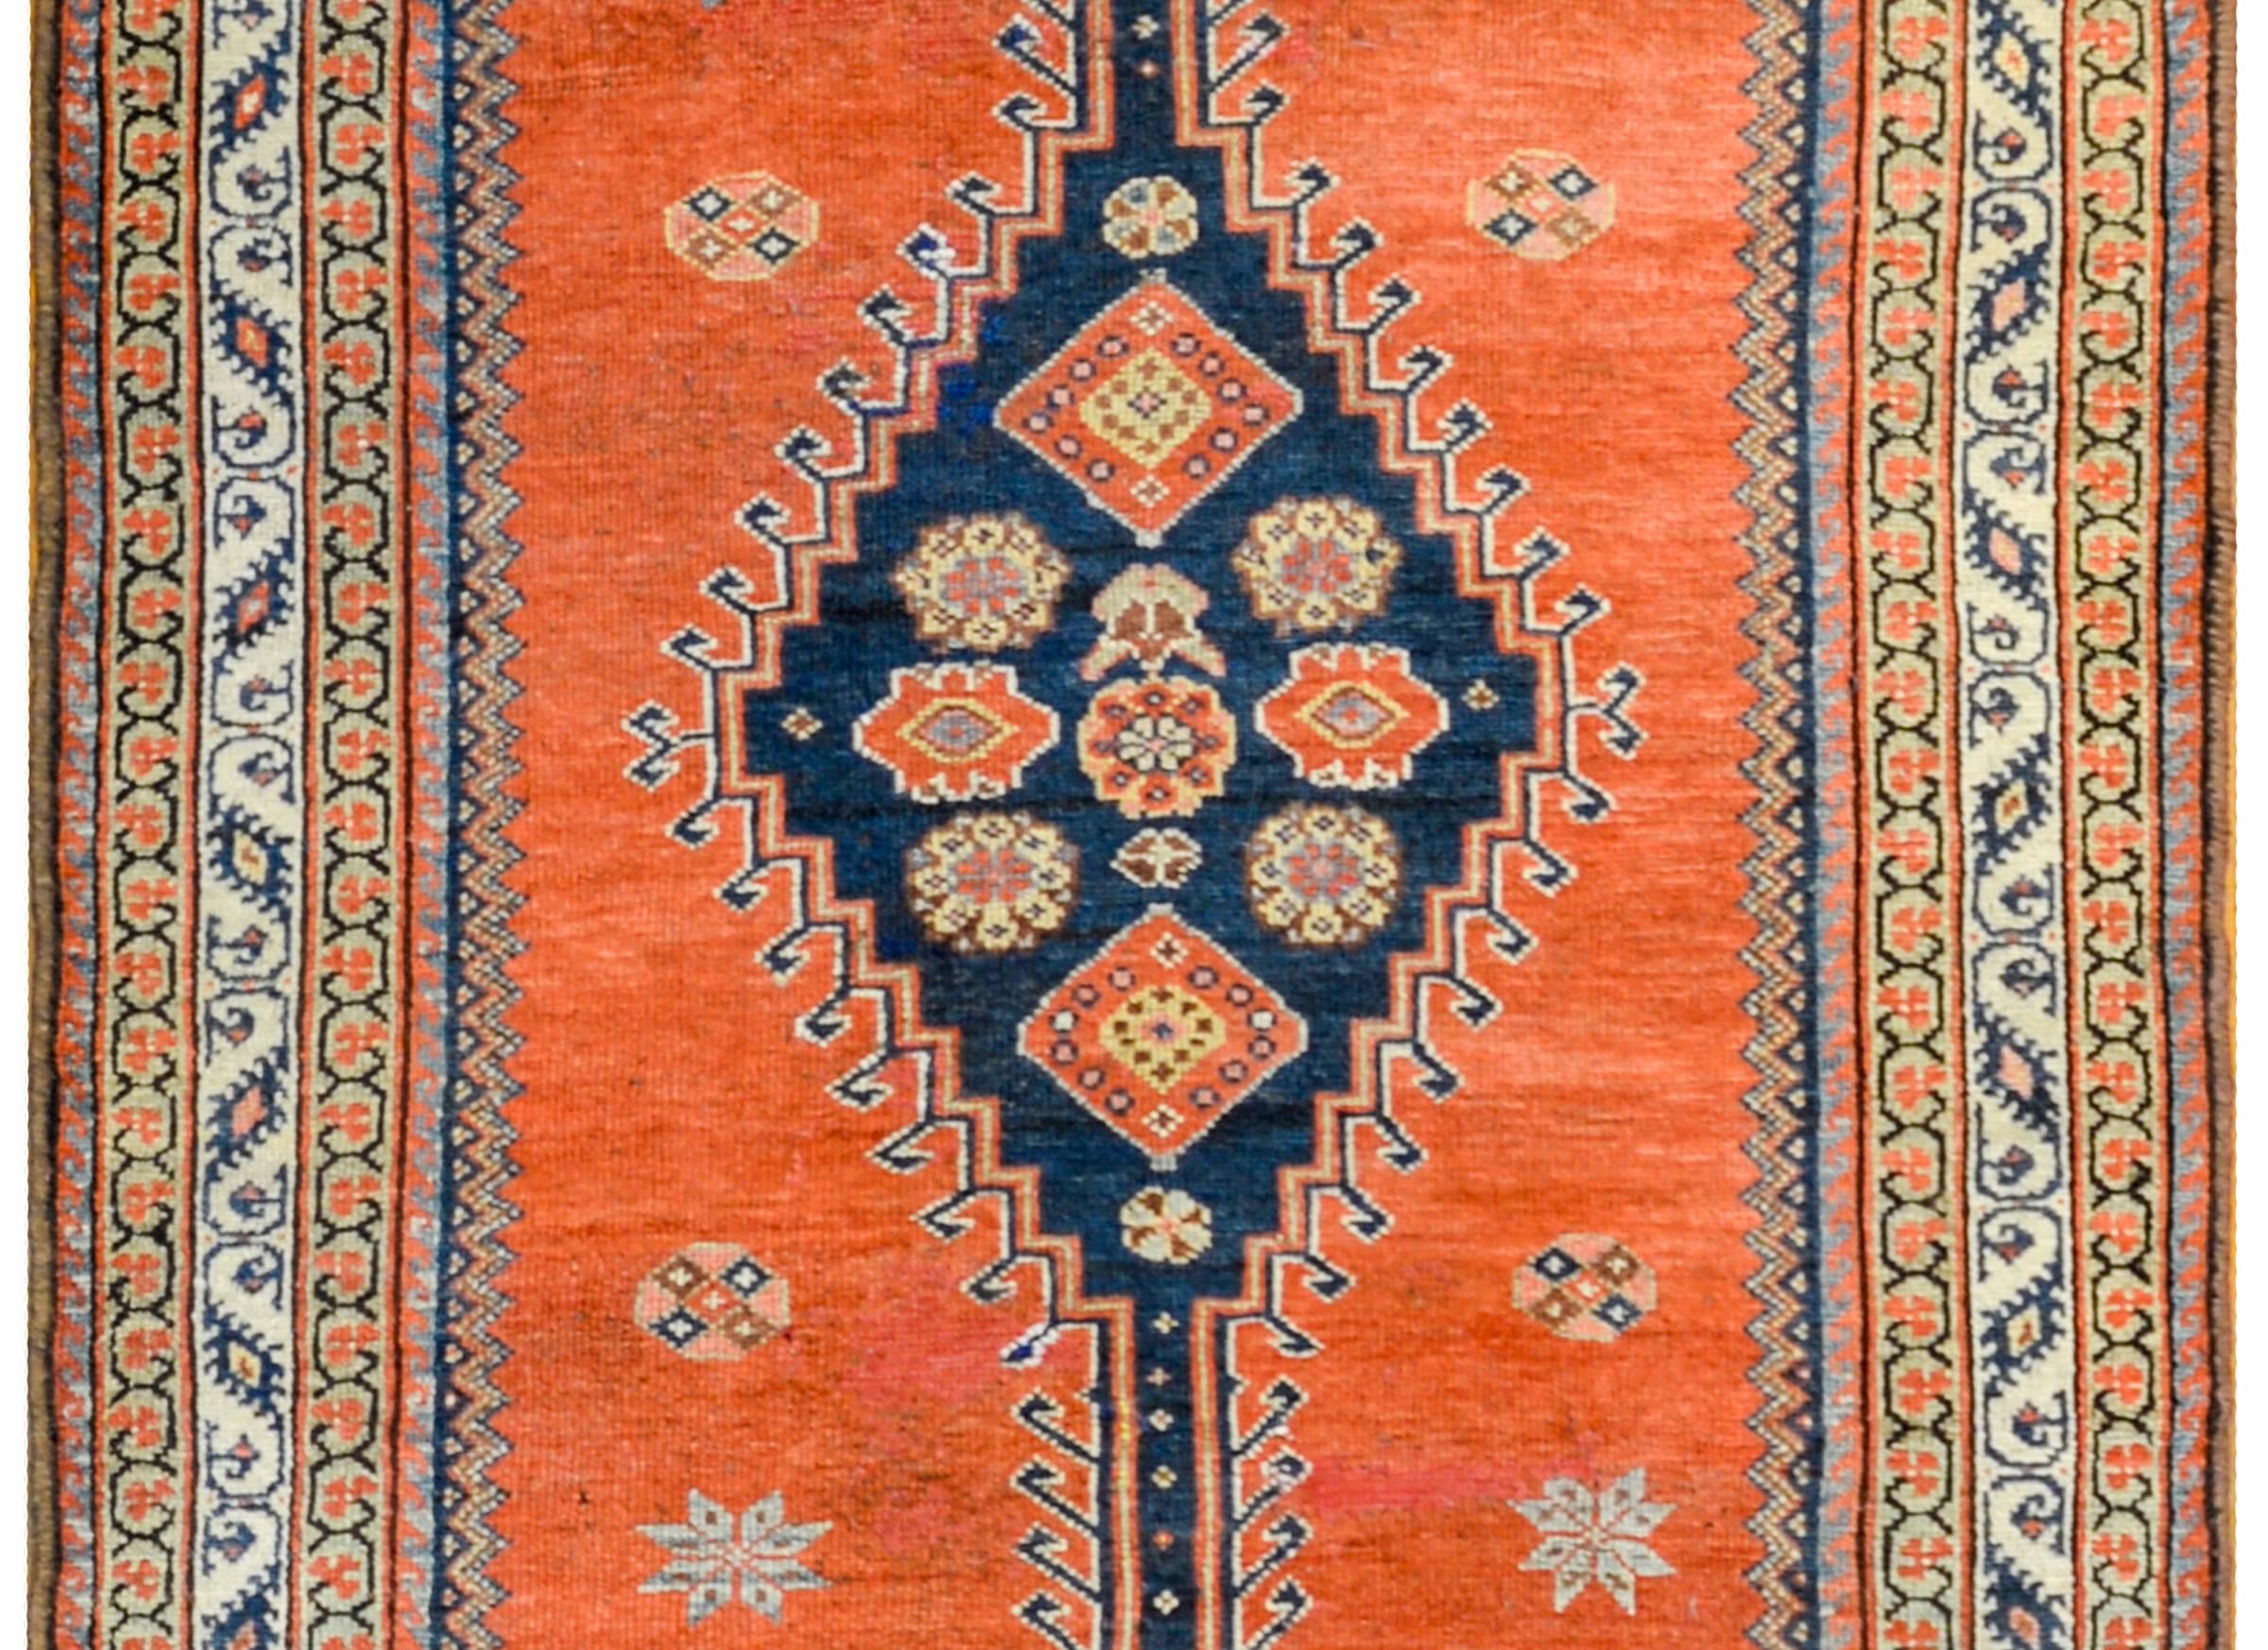 A wonderful late 19th century Persian Azari runner with four large indigo medallions with stylized flowers on a crimson background. The border is thin with three petite floral and vine patterned stripes.